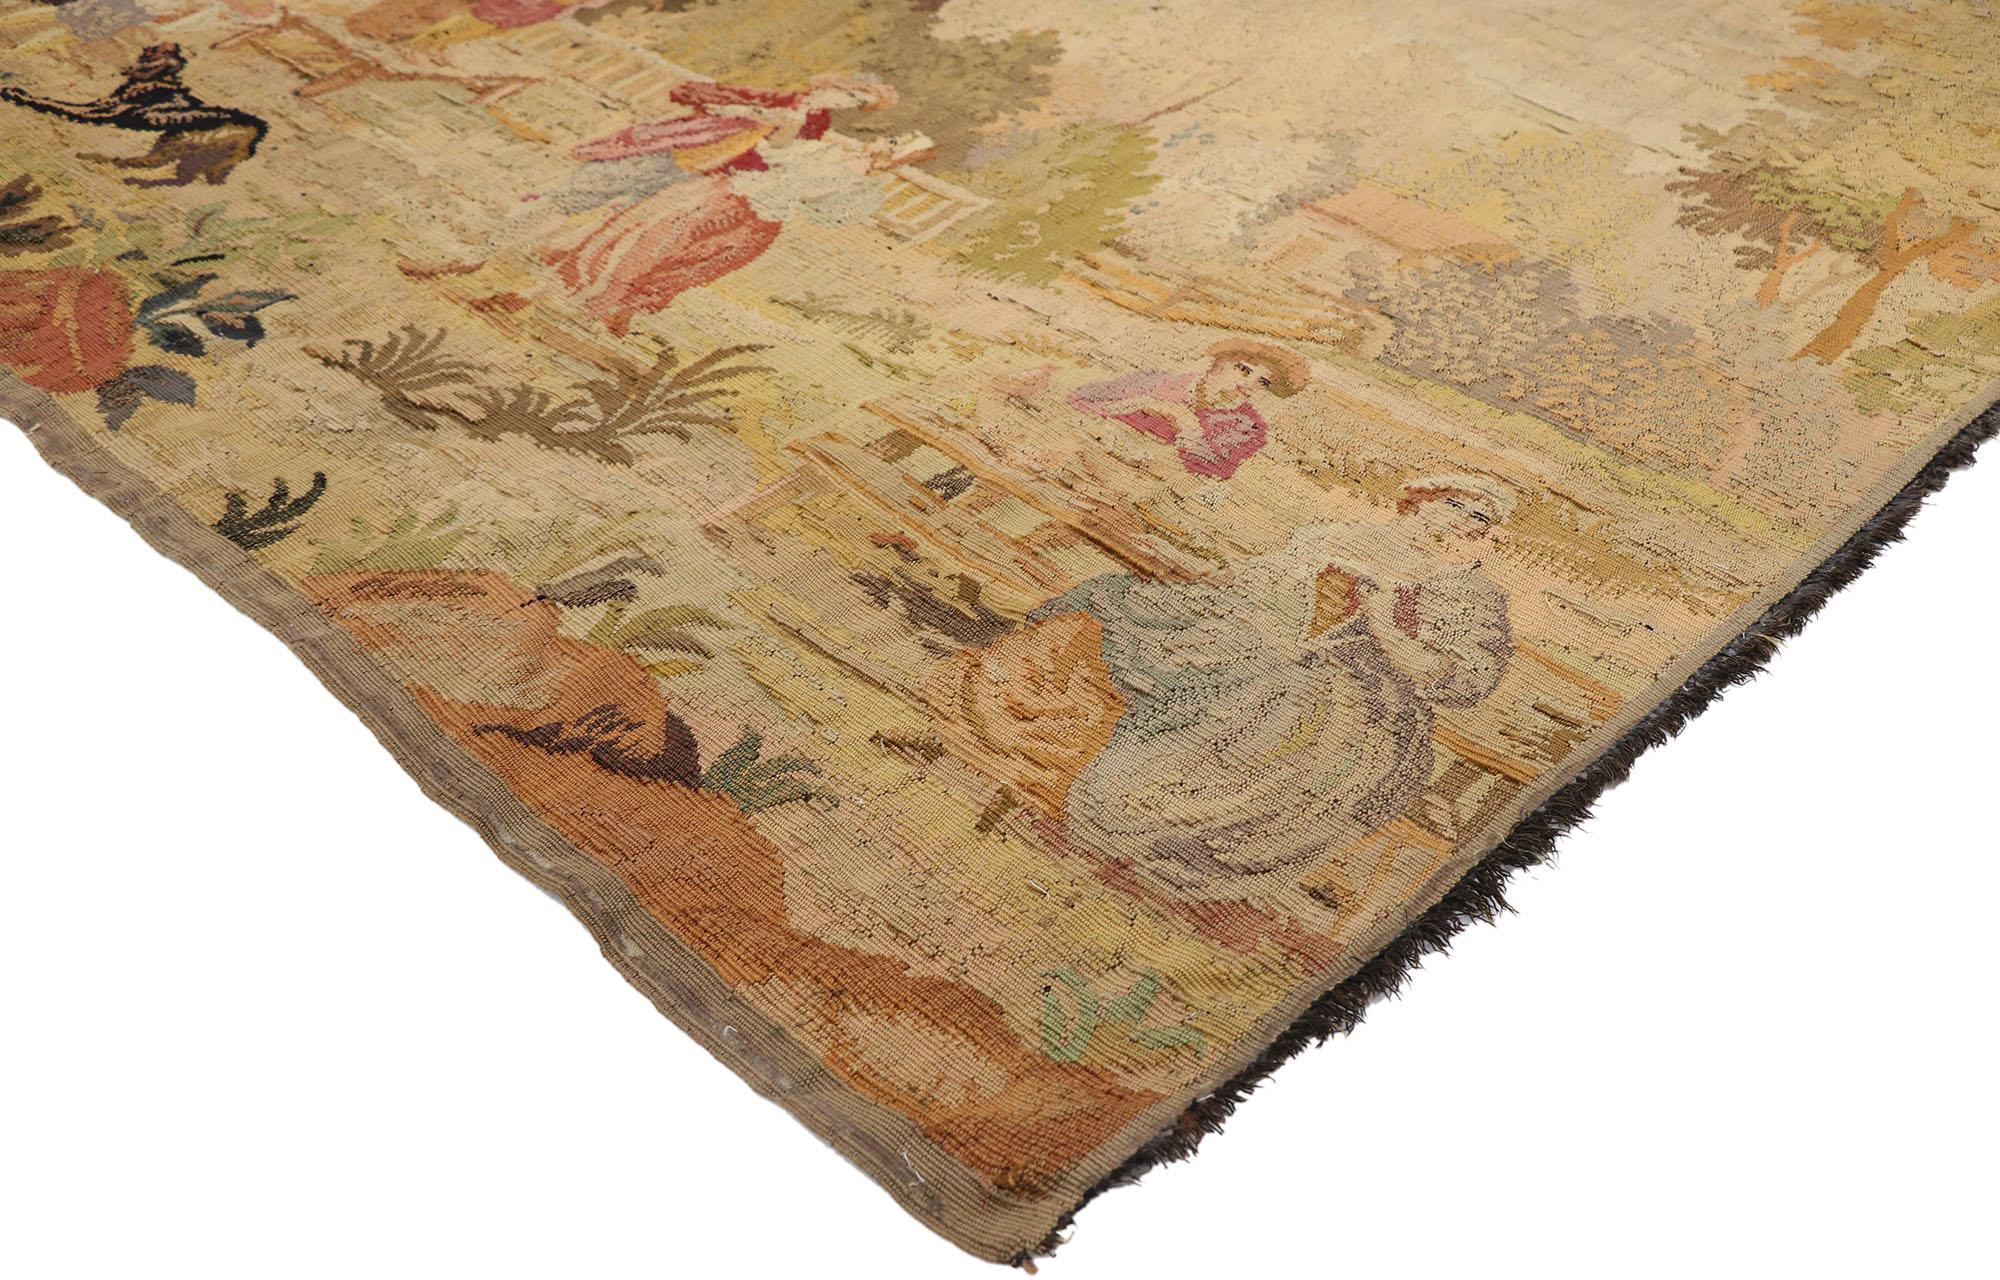 77763, antique French Aubusson pastoral tapestry with Louis XV style, La Danse. Drawing inspiration from Jacques-Nicolas Juillard, Jean-Baptiste Huet, and François Boucher, this hand-woven antique French Aubusson pastoral tapestry beautifully